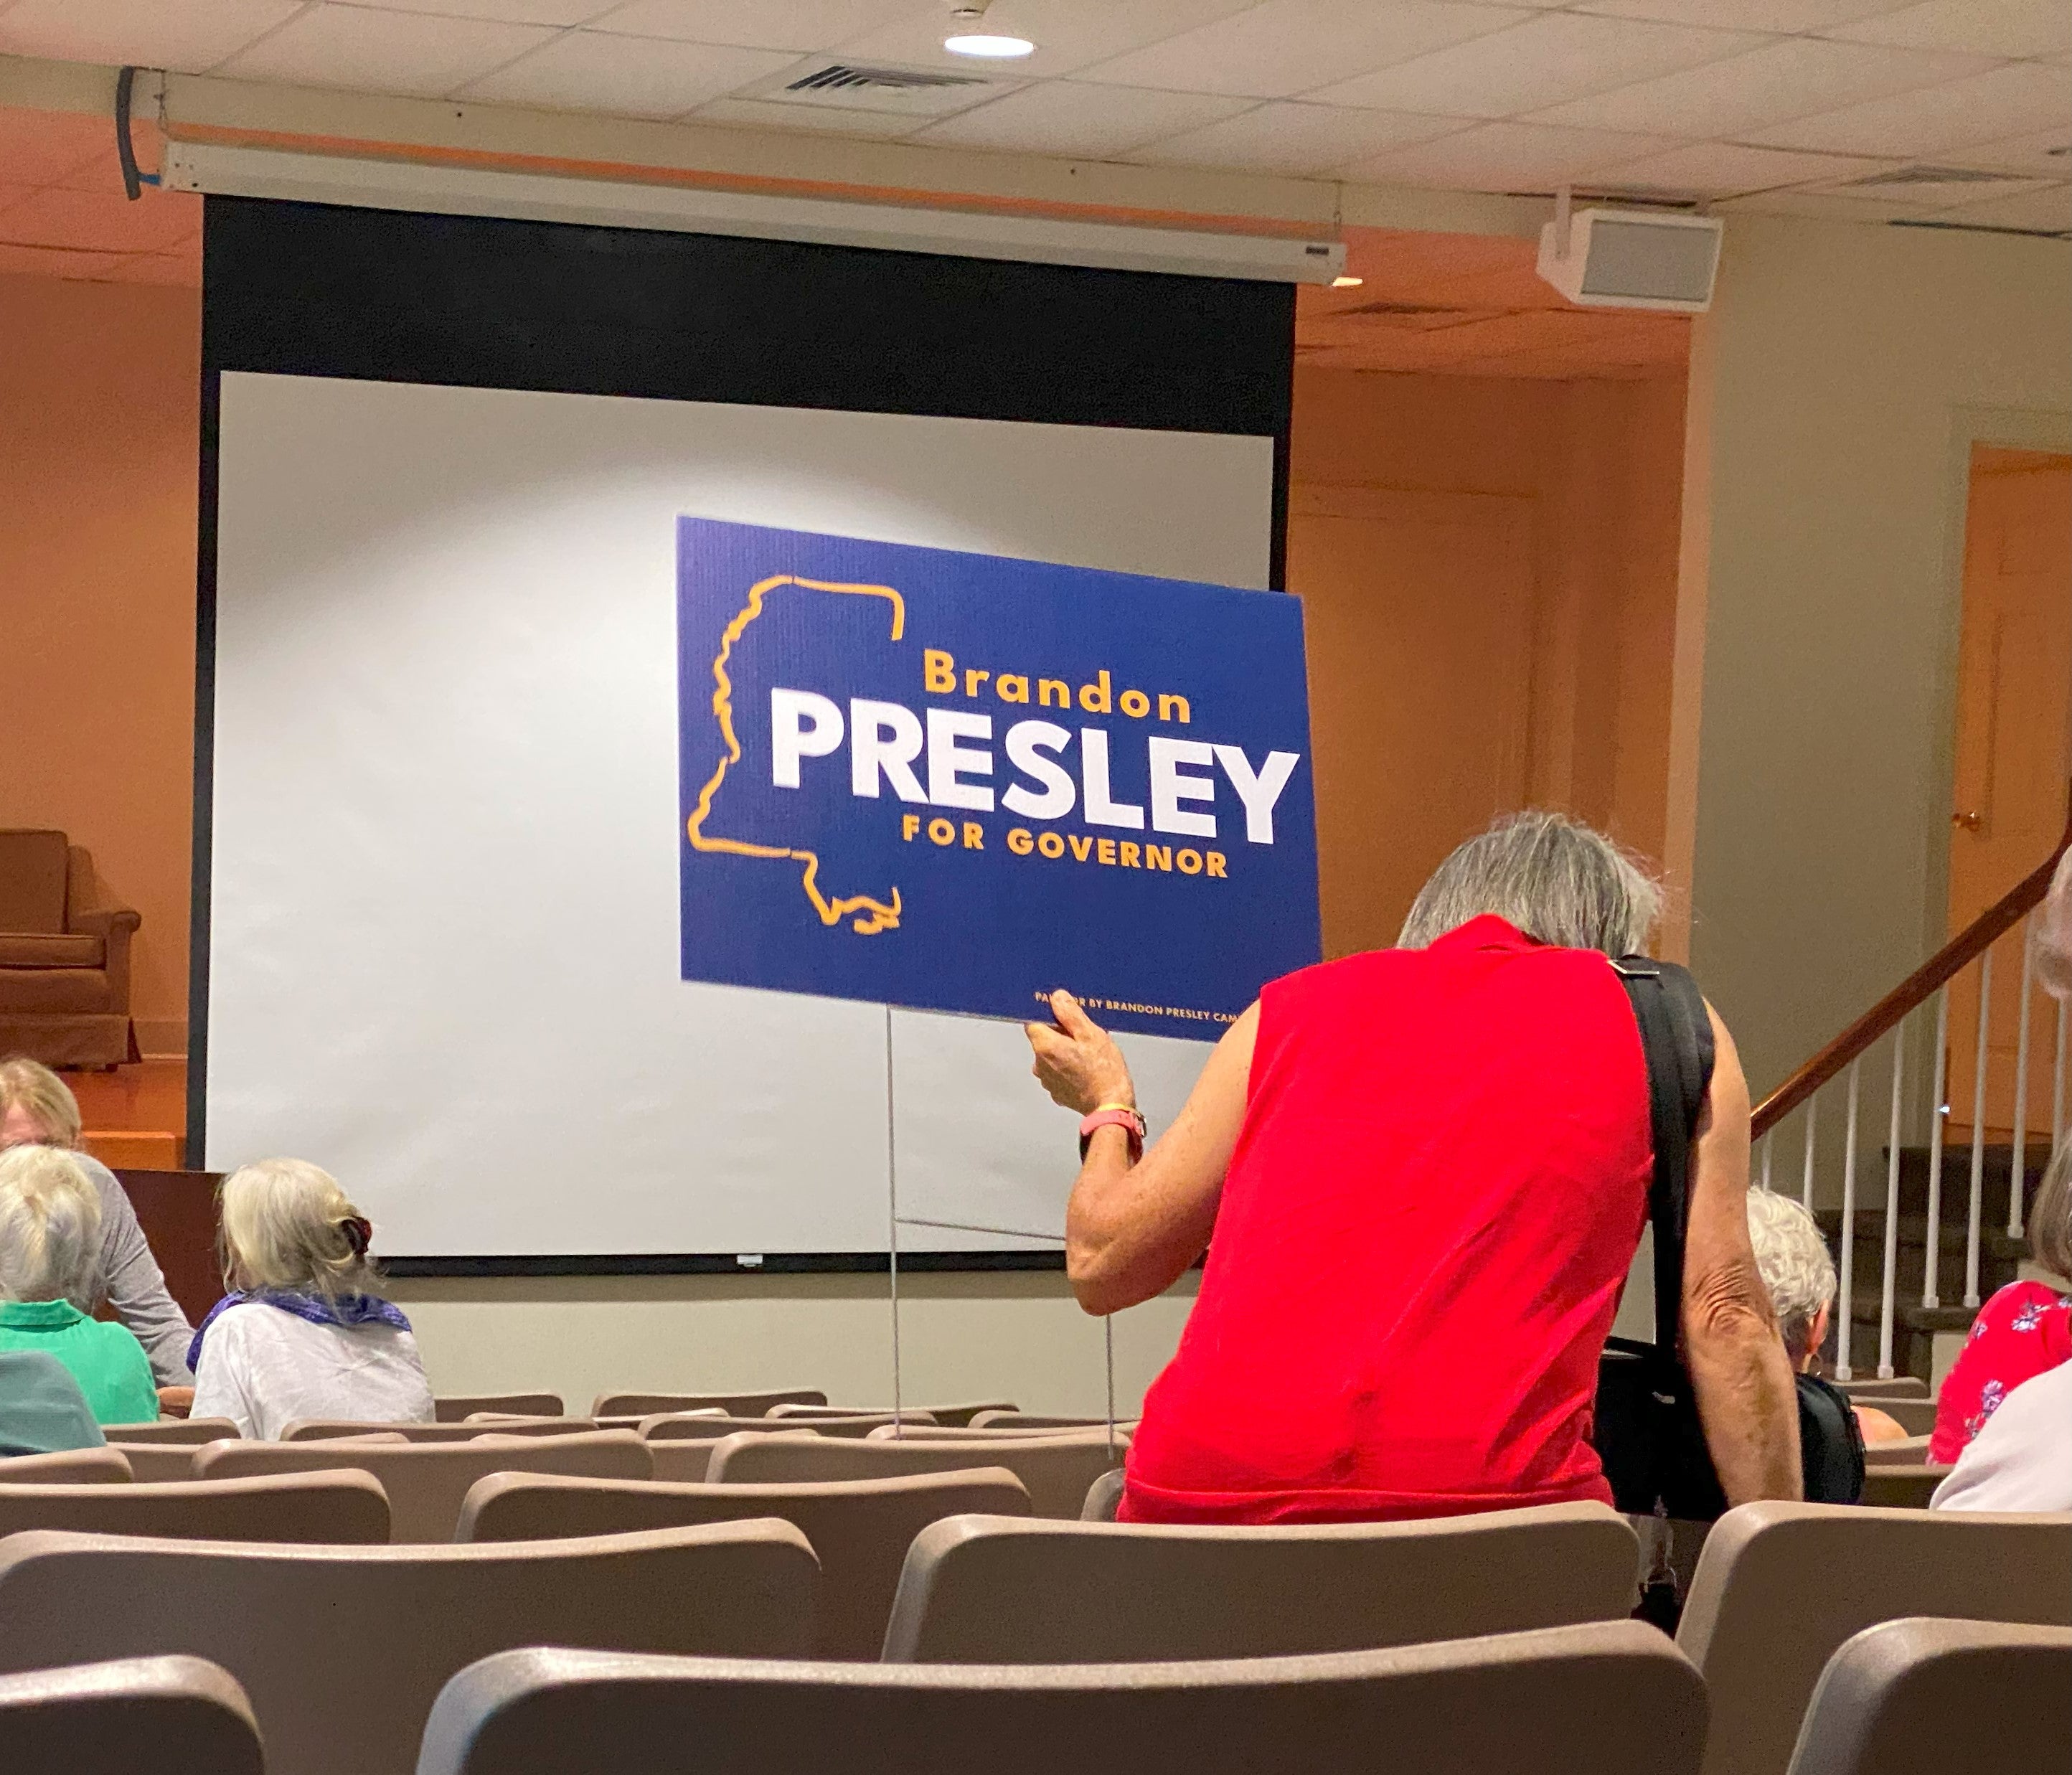 Democratic candidate for Governor of Mississippi, Brandon Presley, visited Oxford Wednesday to hold a town hall at the Oxford-Lafayette Public Library